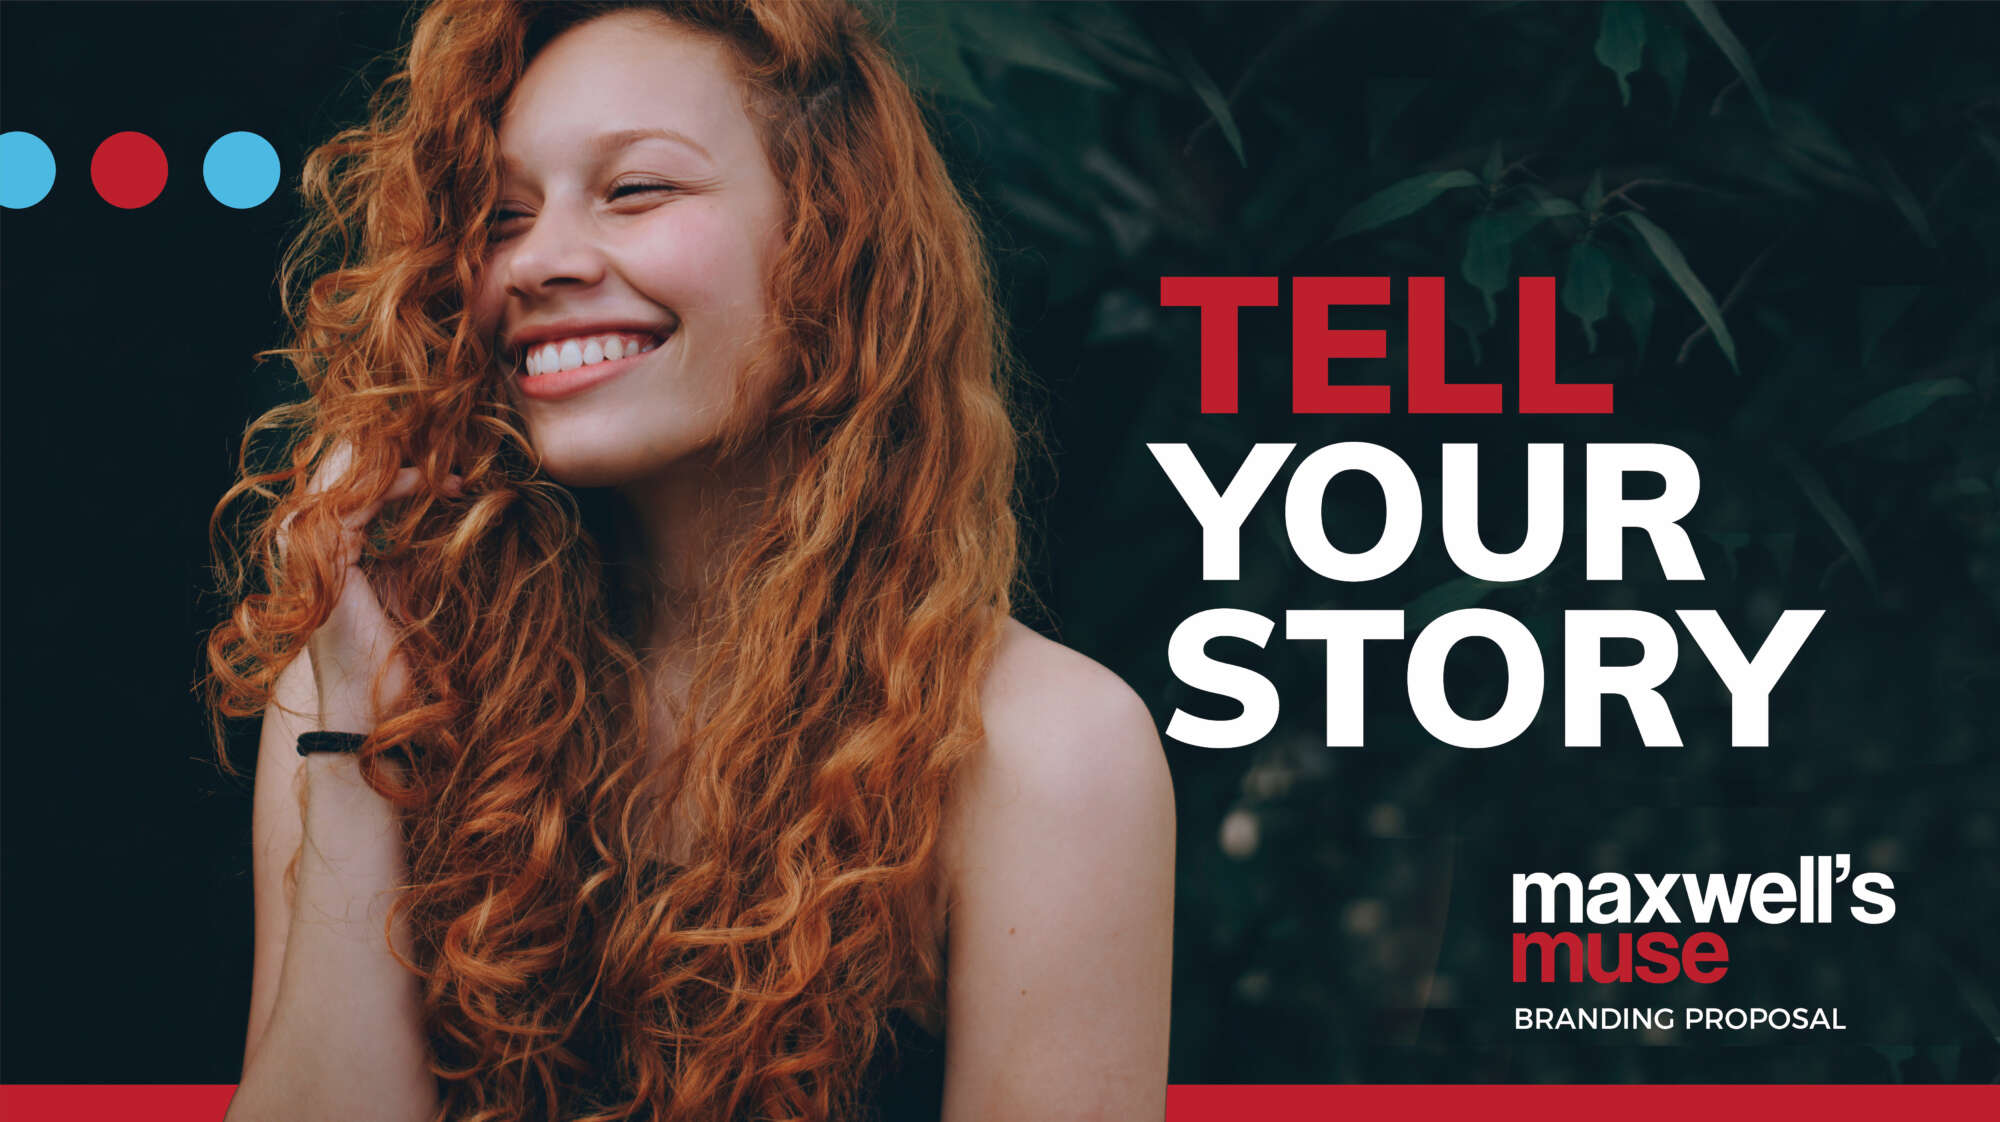 Maxwell's Muse - Tell your story